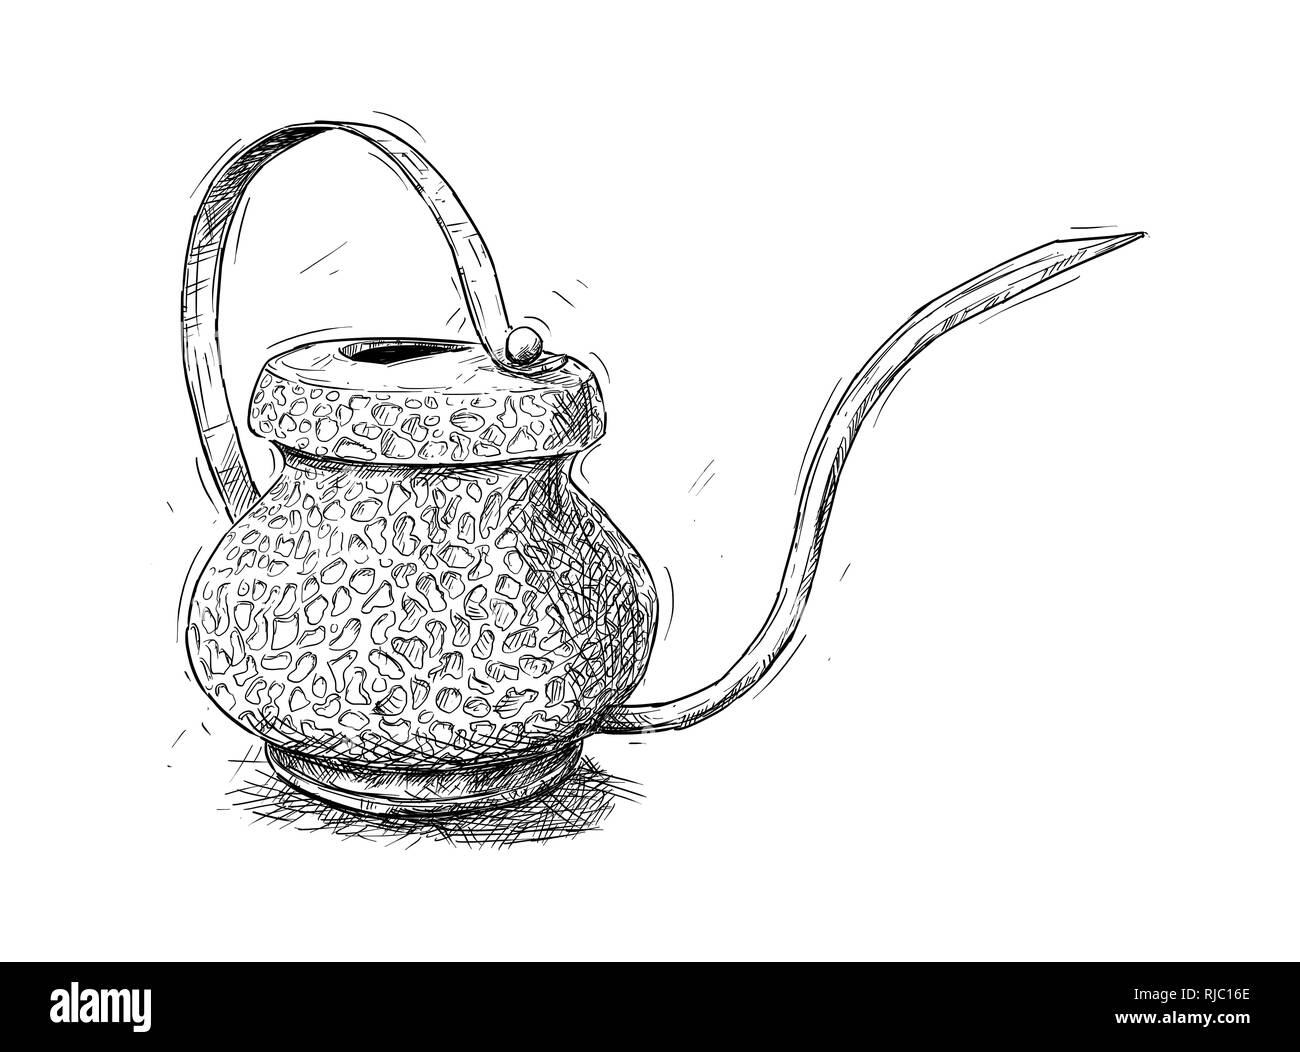 Artistic Illustration or Drawing of Antique Brass Watering Jug or Can Stock Photo